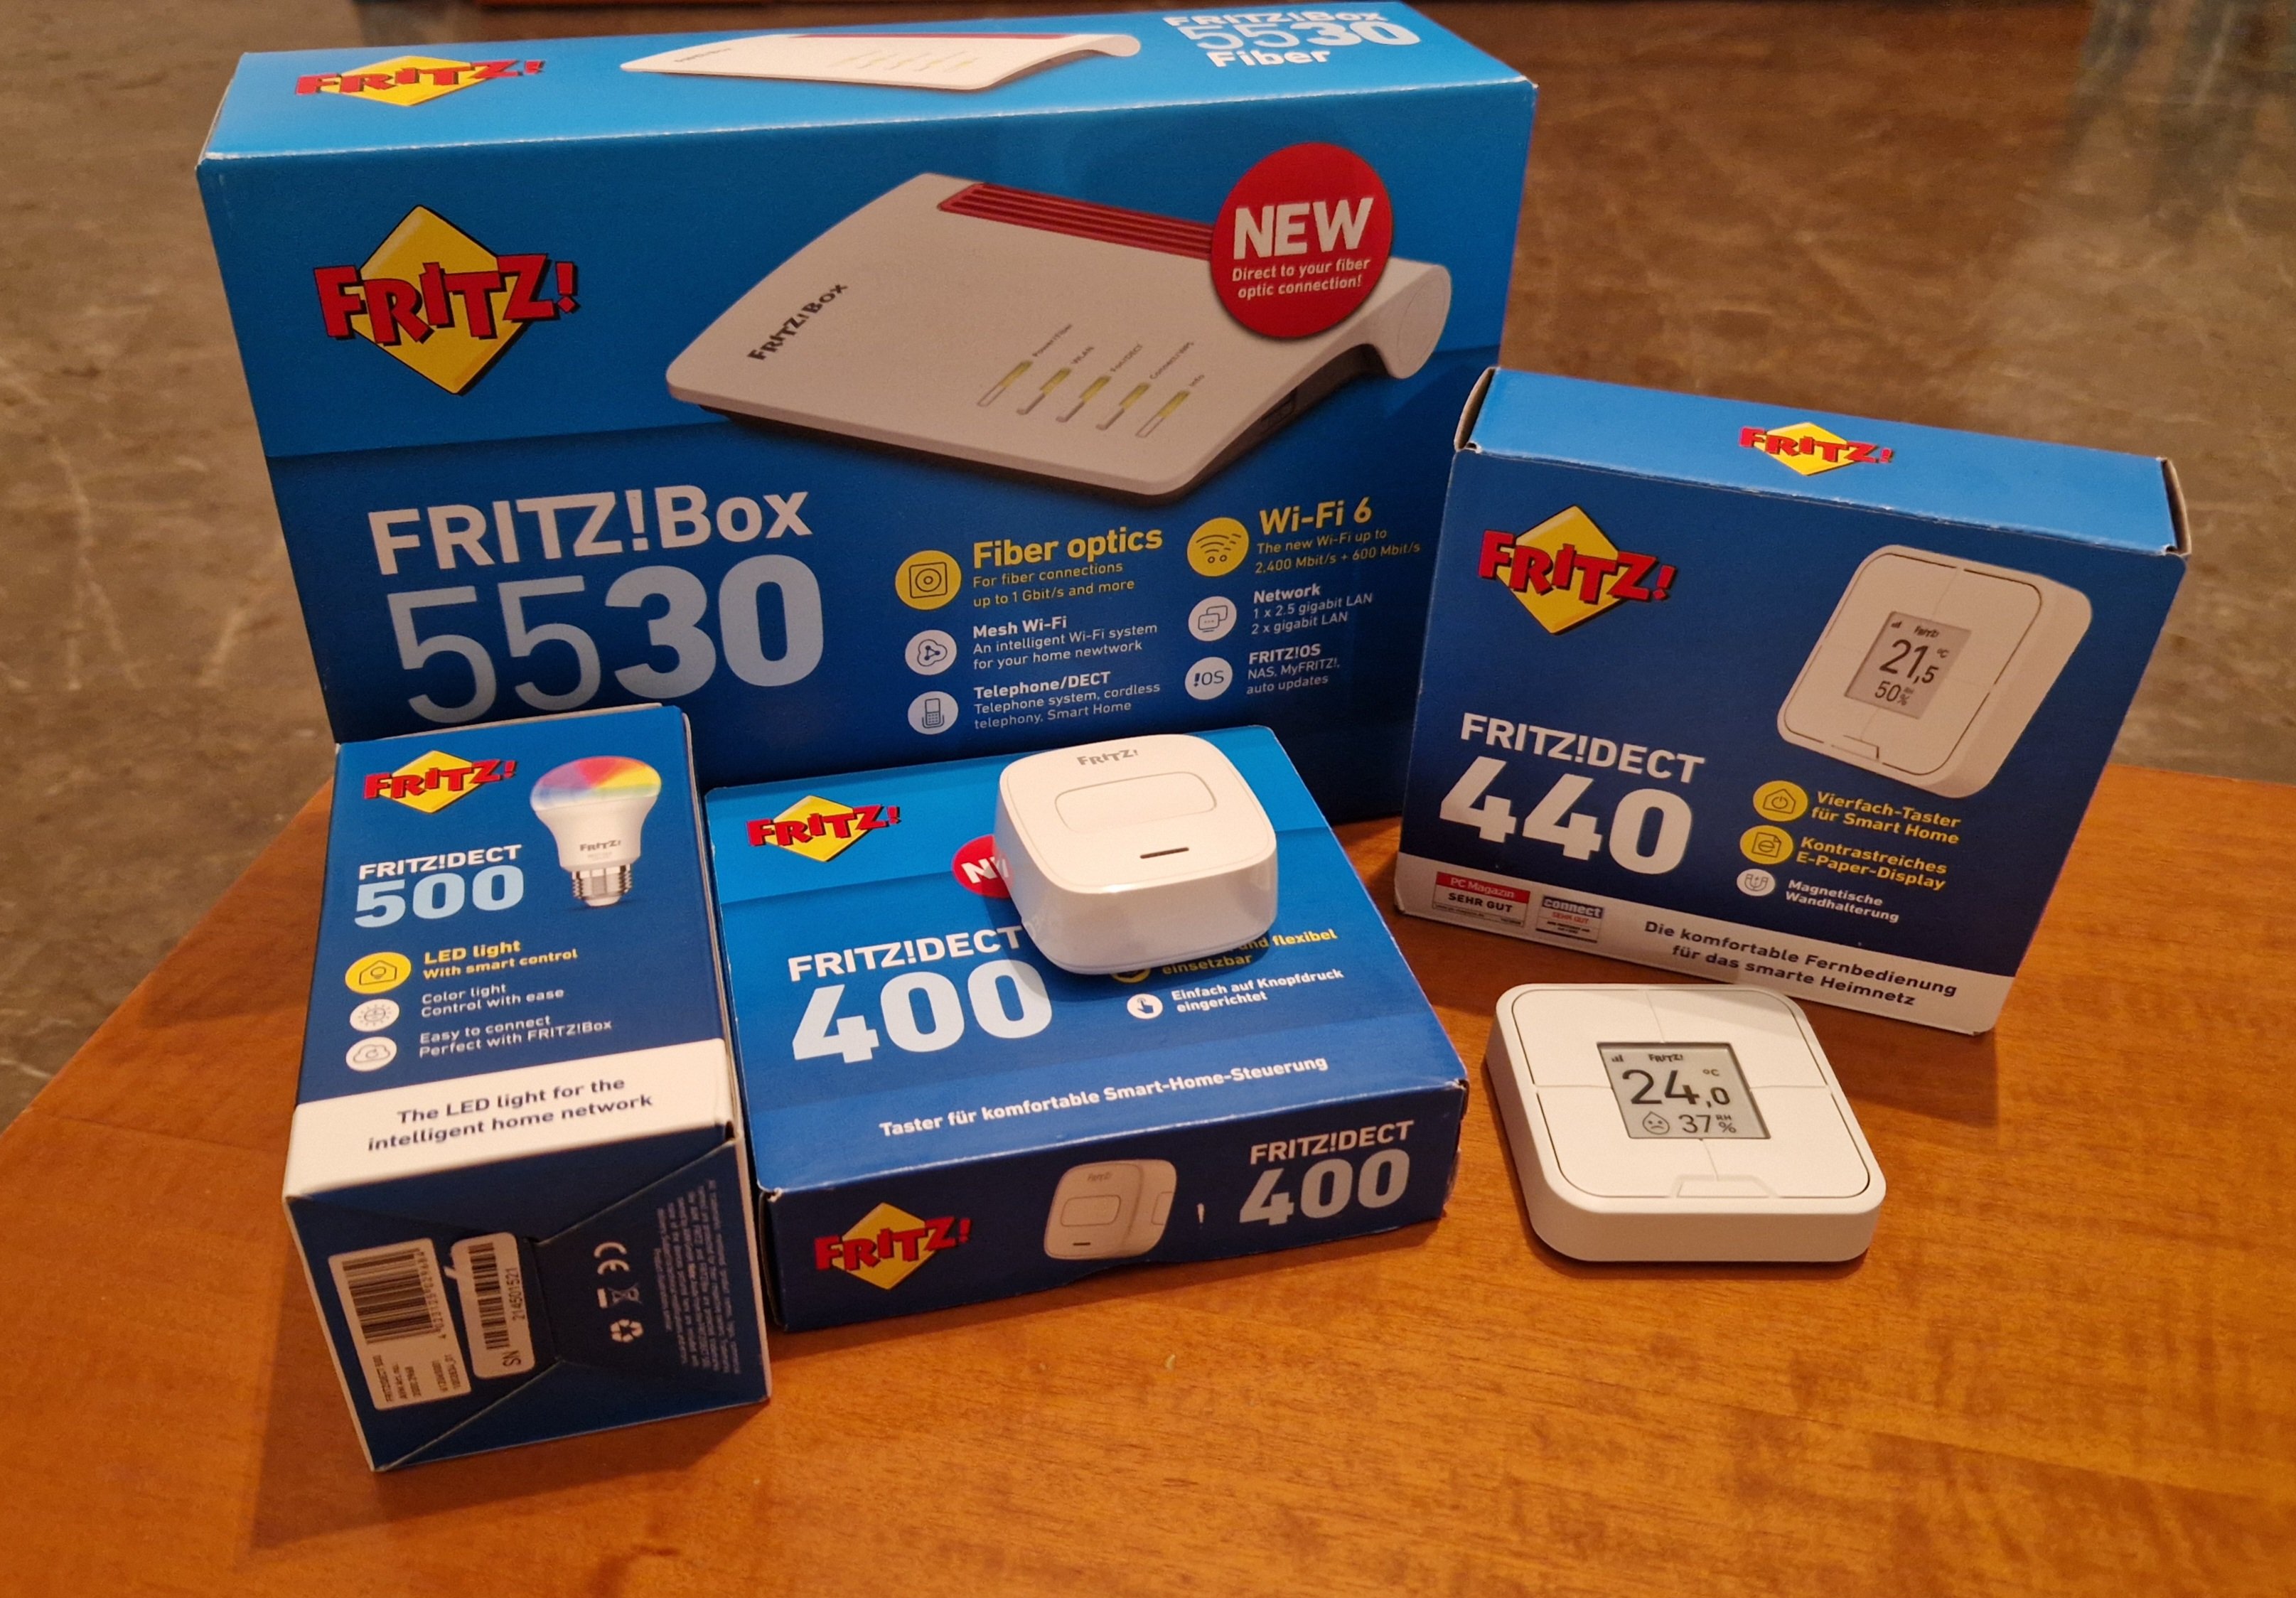 More information about "FRITZ!DECT 440, FRITZ!DECT 400, FRITZ!DECT 500. To Smart Home είναι εδώ!"